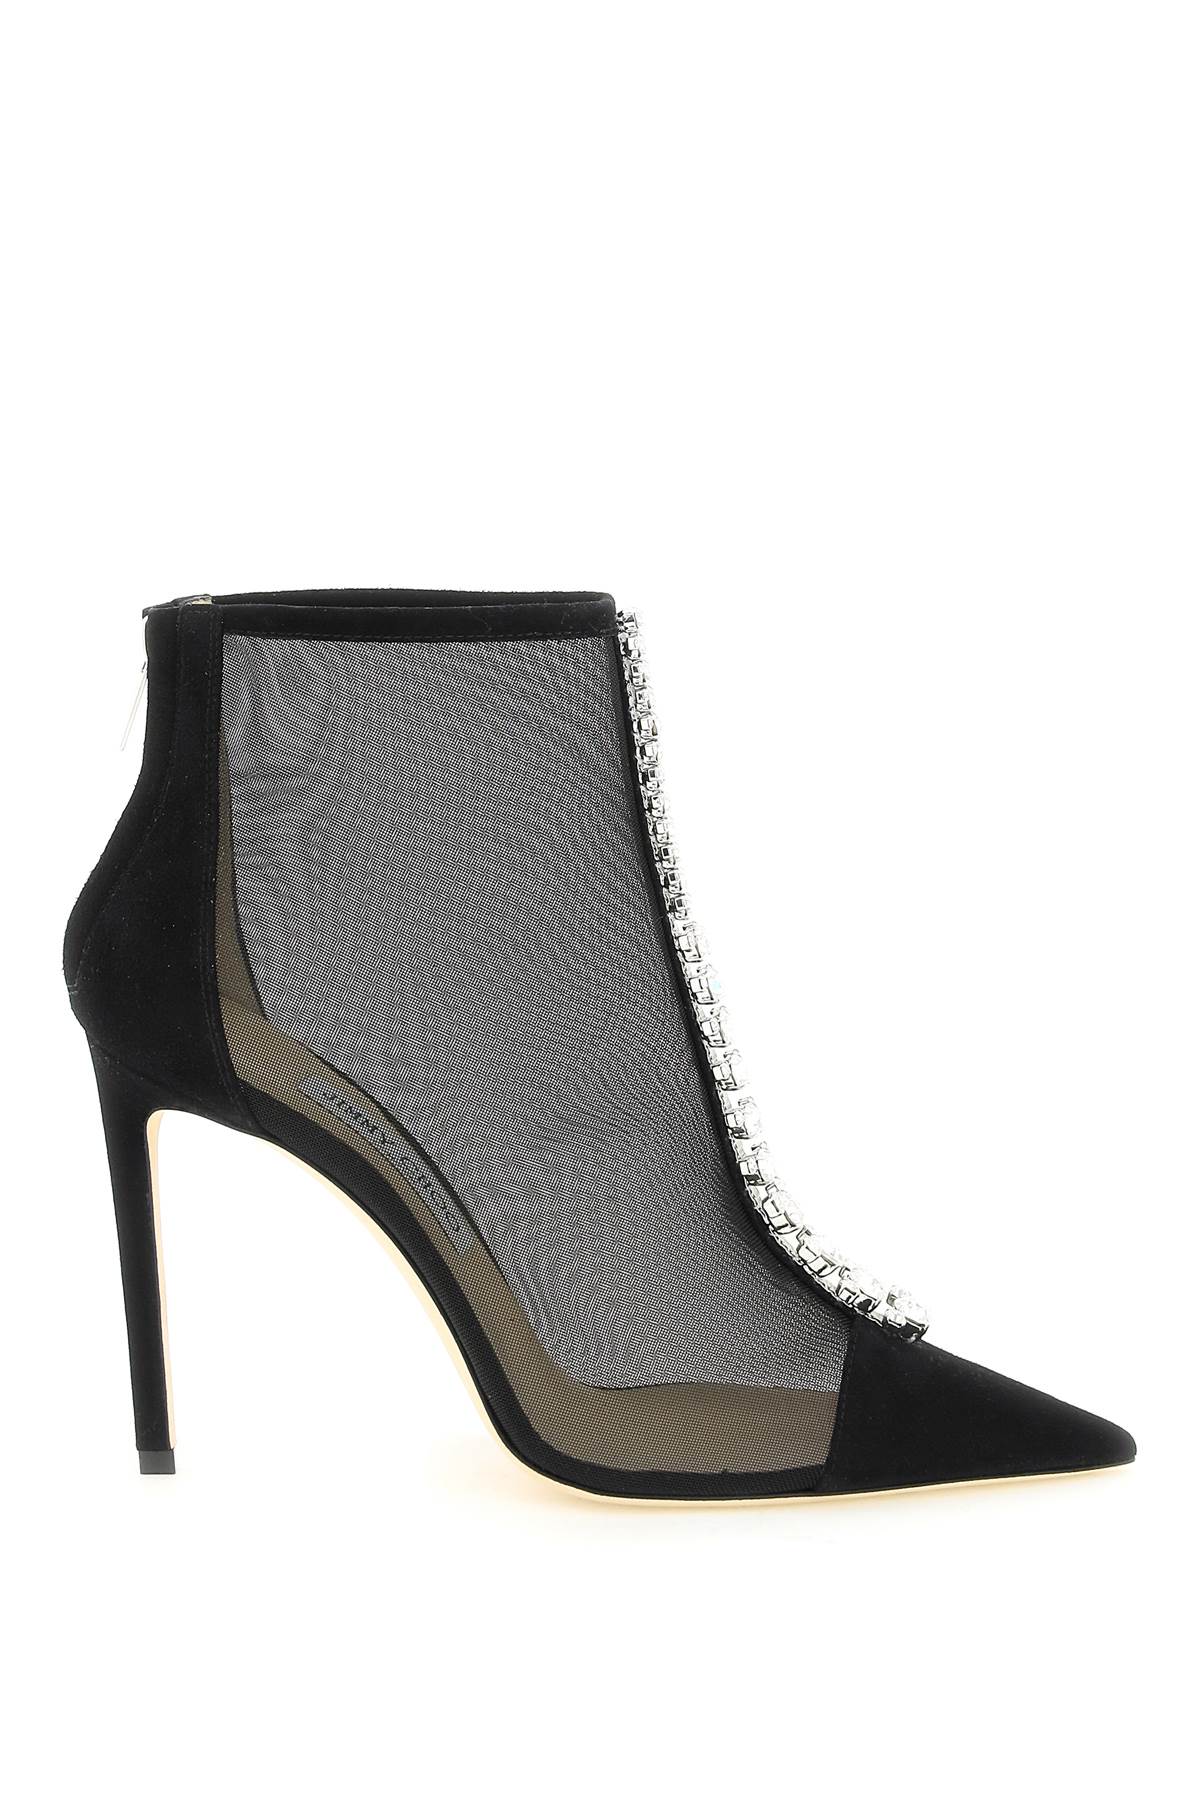 Luxury Black Ankle Boots for Women by JIMMY CHOO